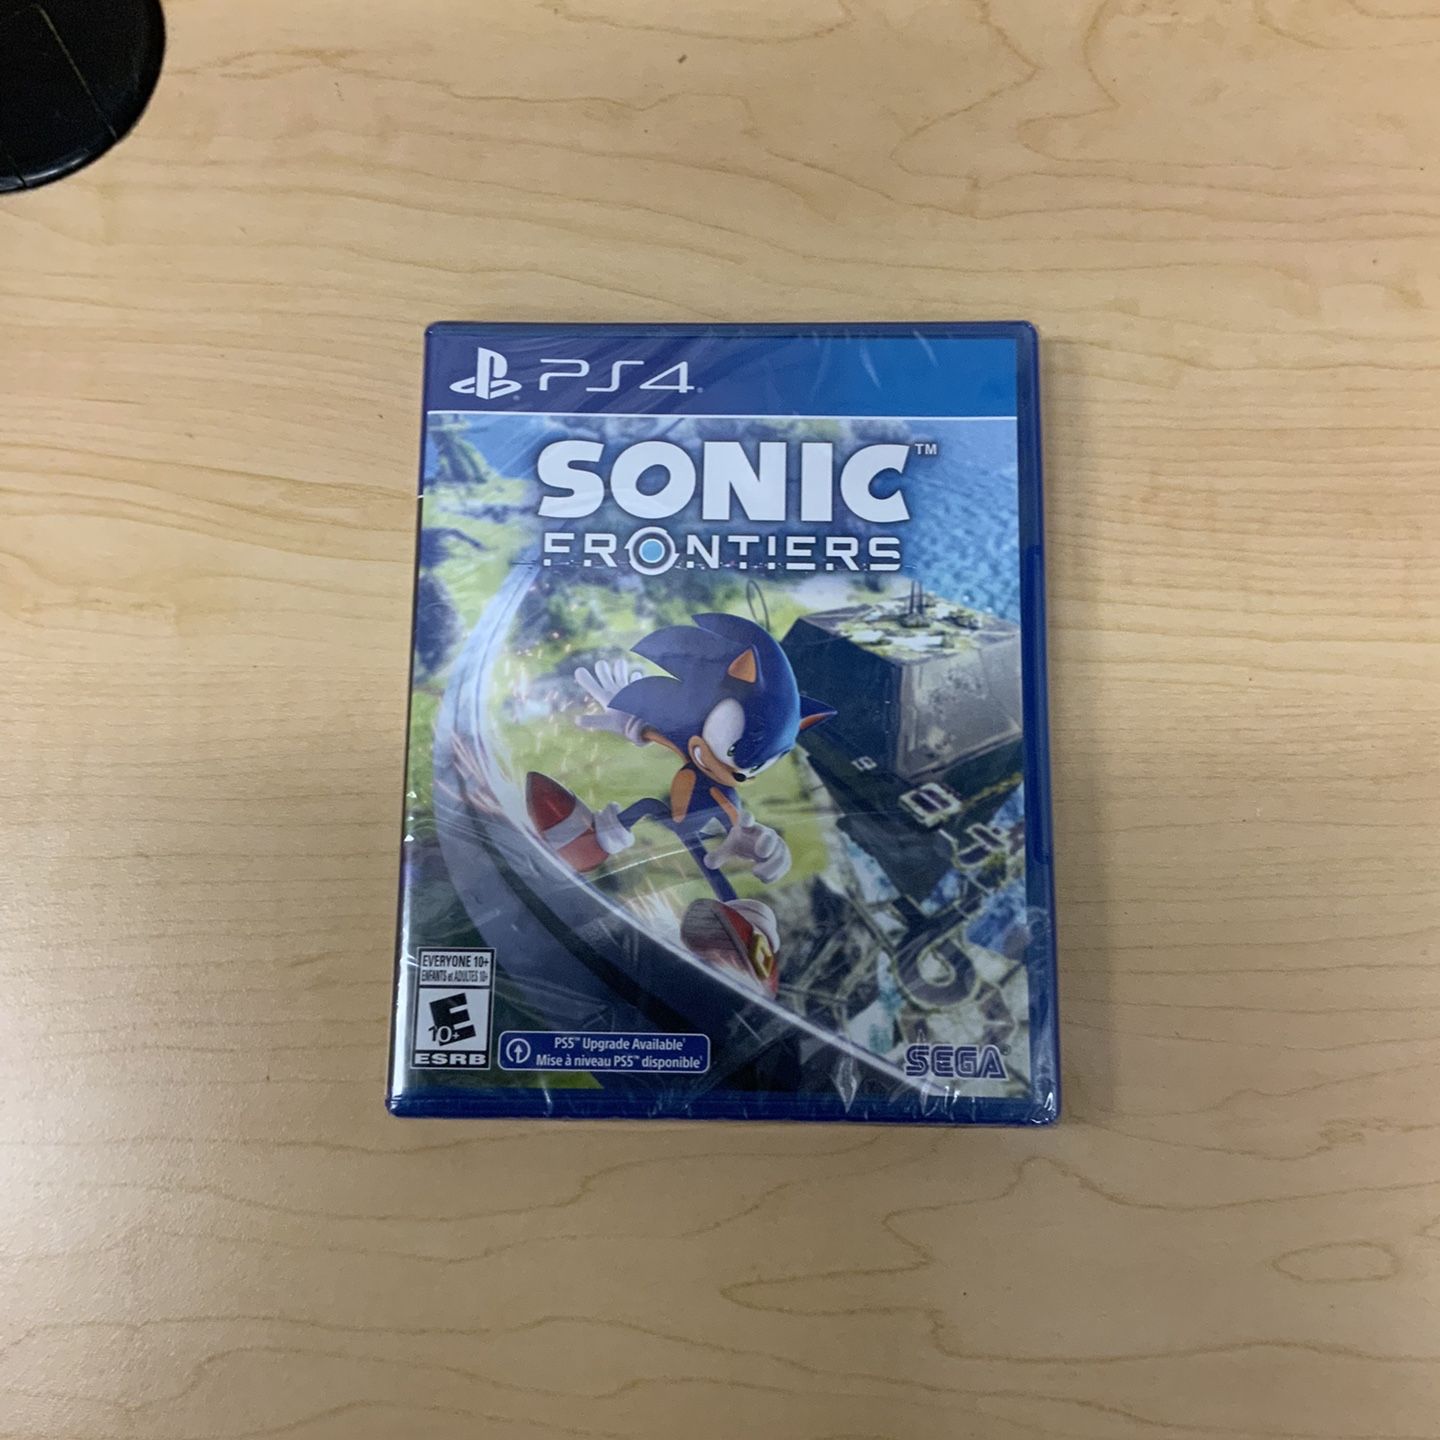 Playstation 4 Sonic Frontiers PS4 Games Blue Ray Disc Sealed 